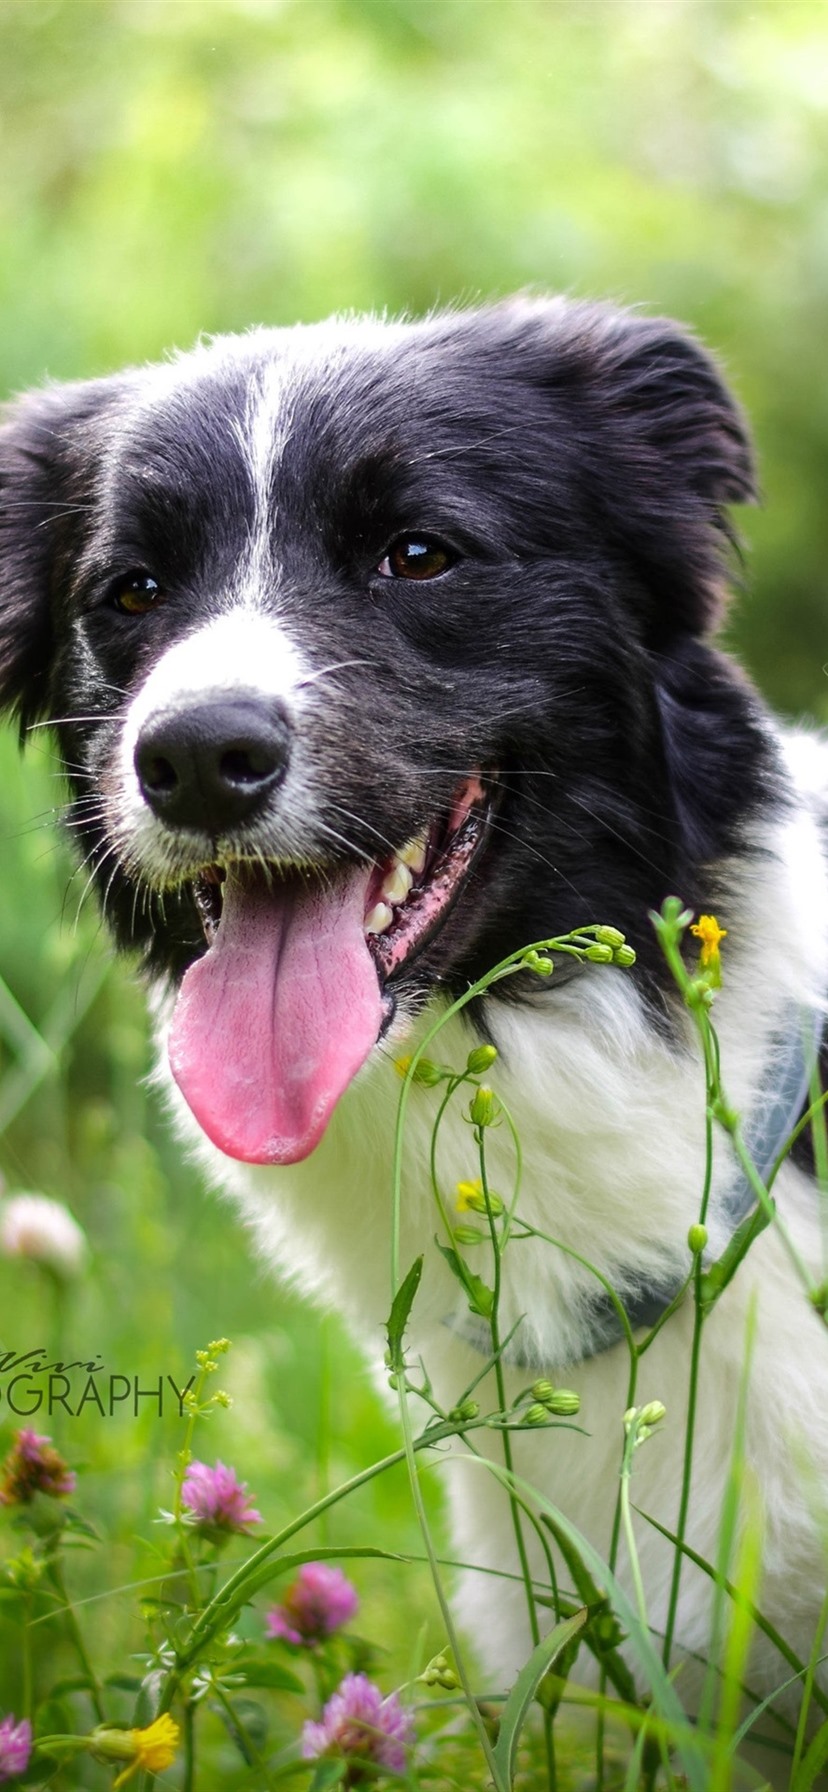 Summer, Dog, Grass, Wildflowers 1080x1920 IPhone 8 7 6 6S Plus Wallpaper, Background, Picture, Image